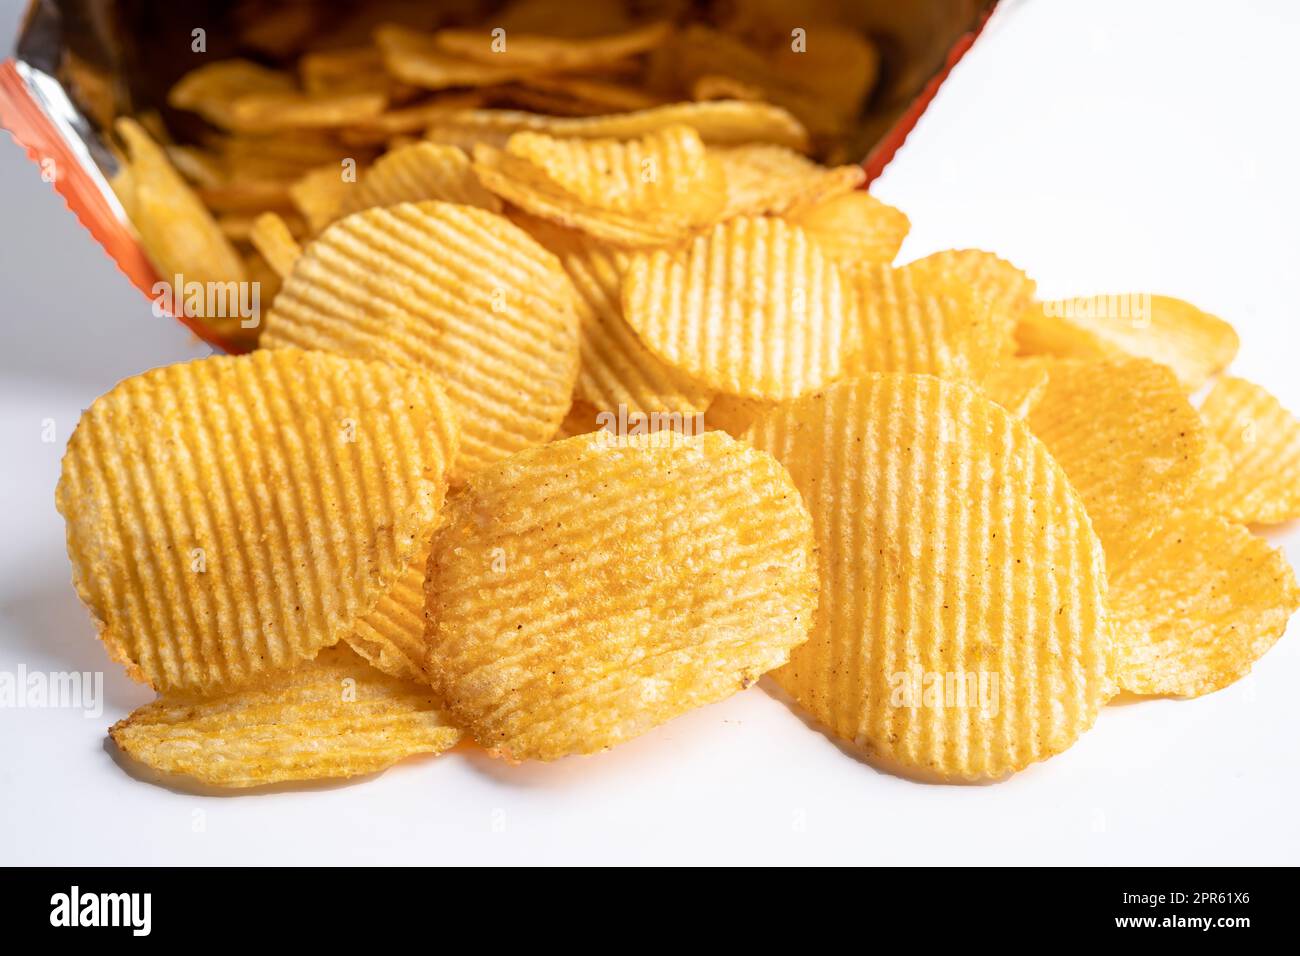 Potato chips, delicious BBQ seasoning spicy for crips, thin slice deep fried snack fast food in open bag. Stock Photo